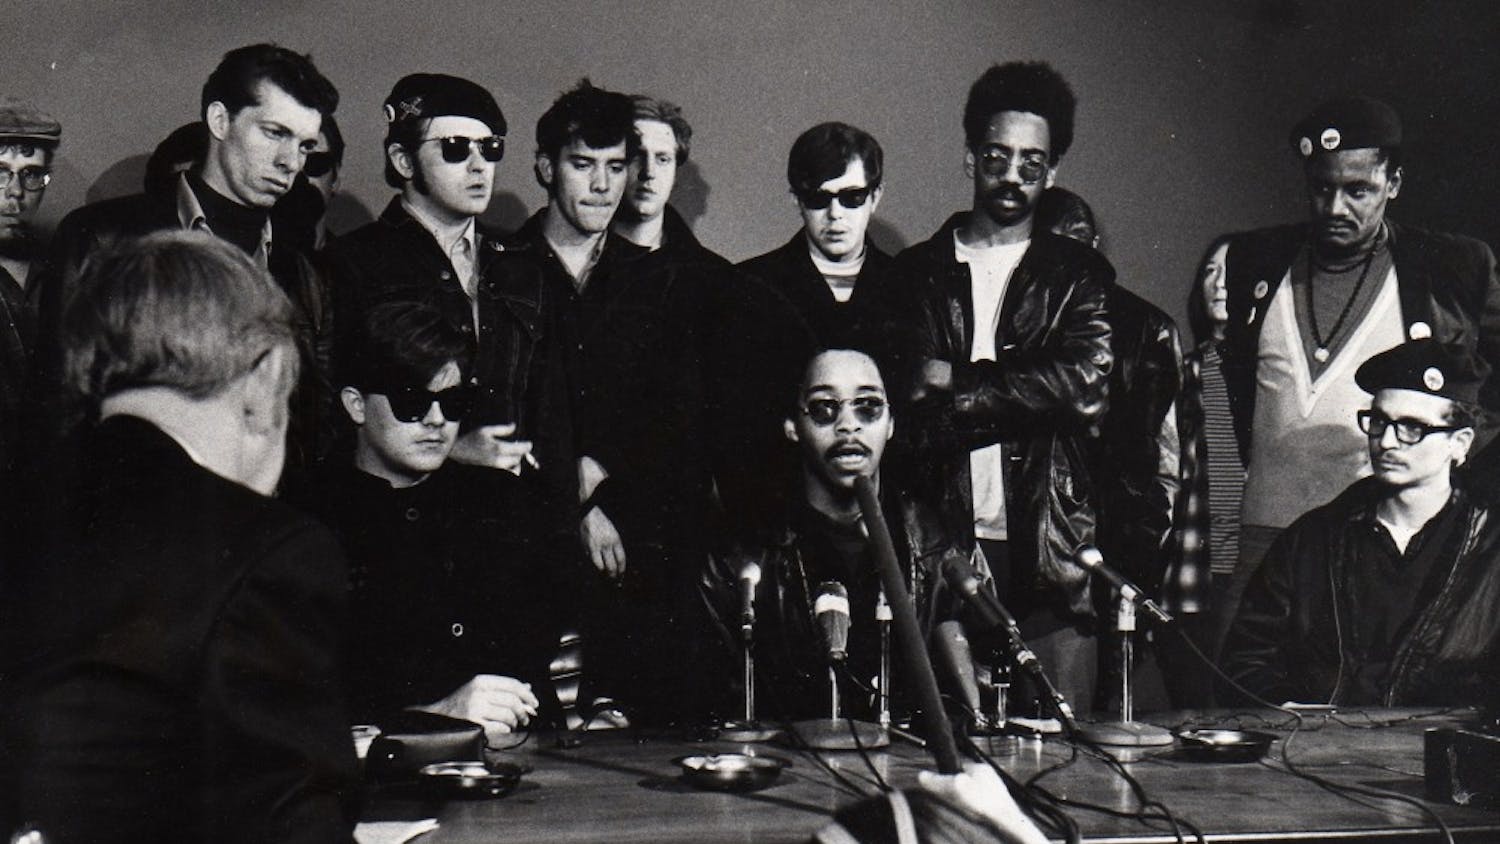 Members of&nbsp;the&nbsp;Original Rainbow Coalition speak at a&nbsp;press conference&nbsp;on April 4, 1969 in Chicago,&nbsp;commemorating the first anniversary of Dr. Martin Luther King's death.&nbsp;